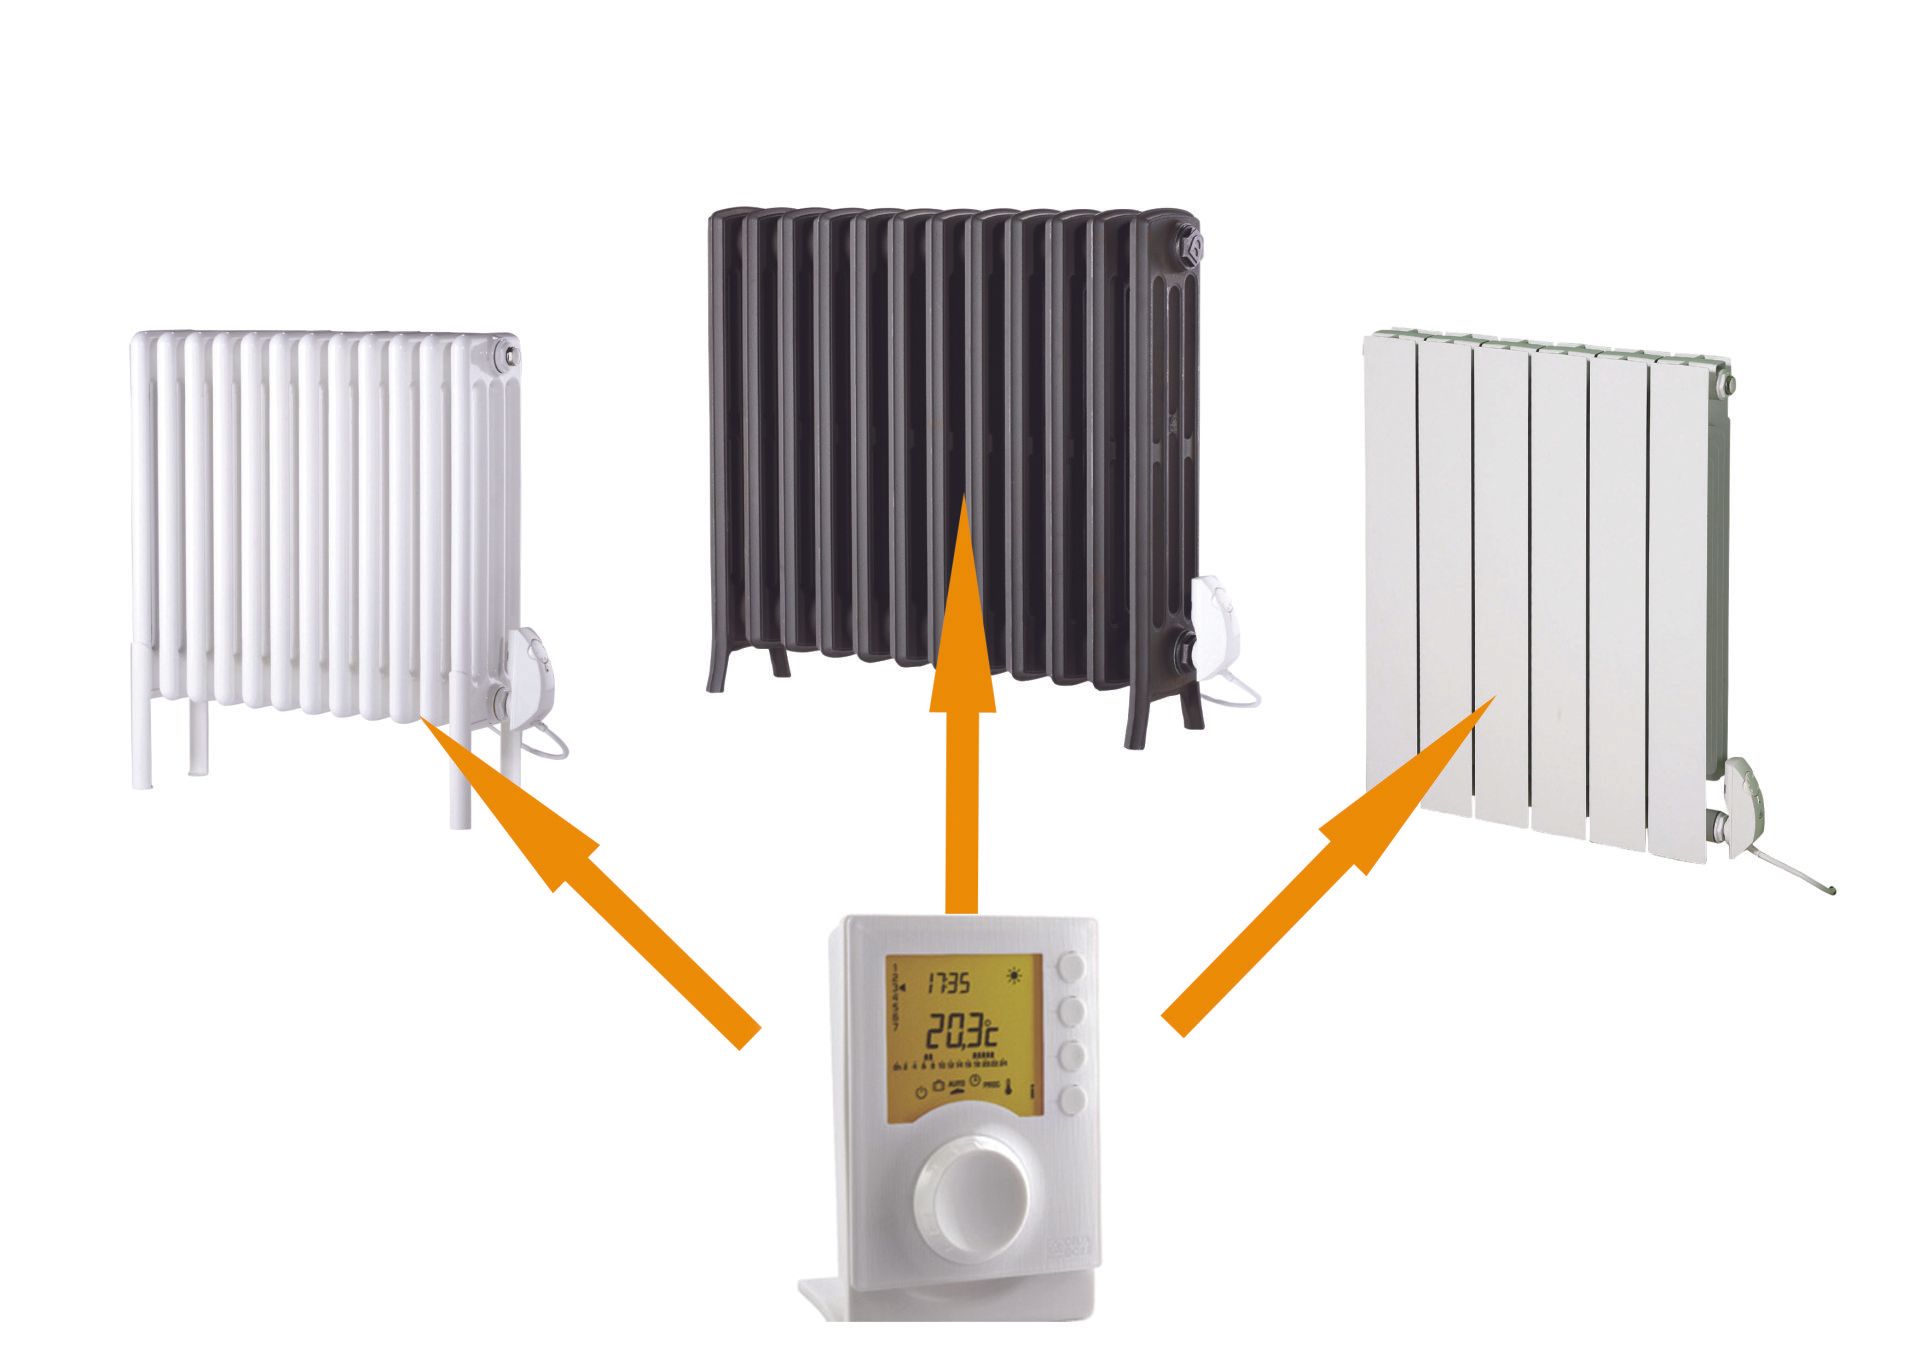 Electric central heating system including column, cast iron and aluminium radiators